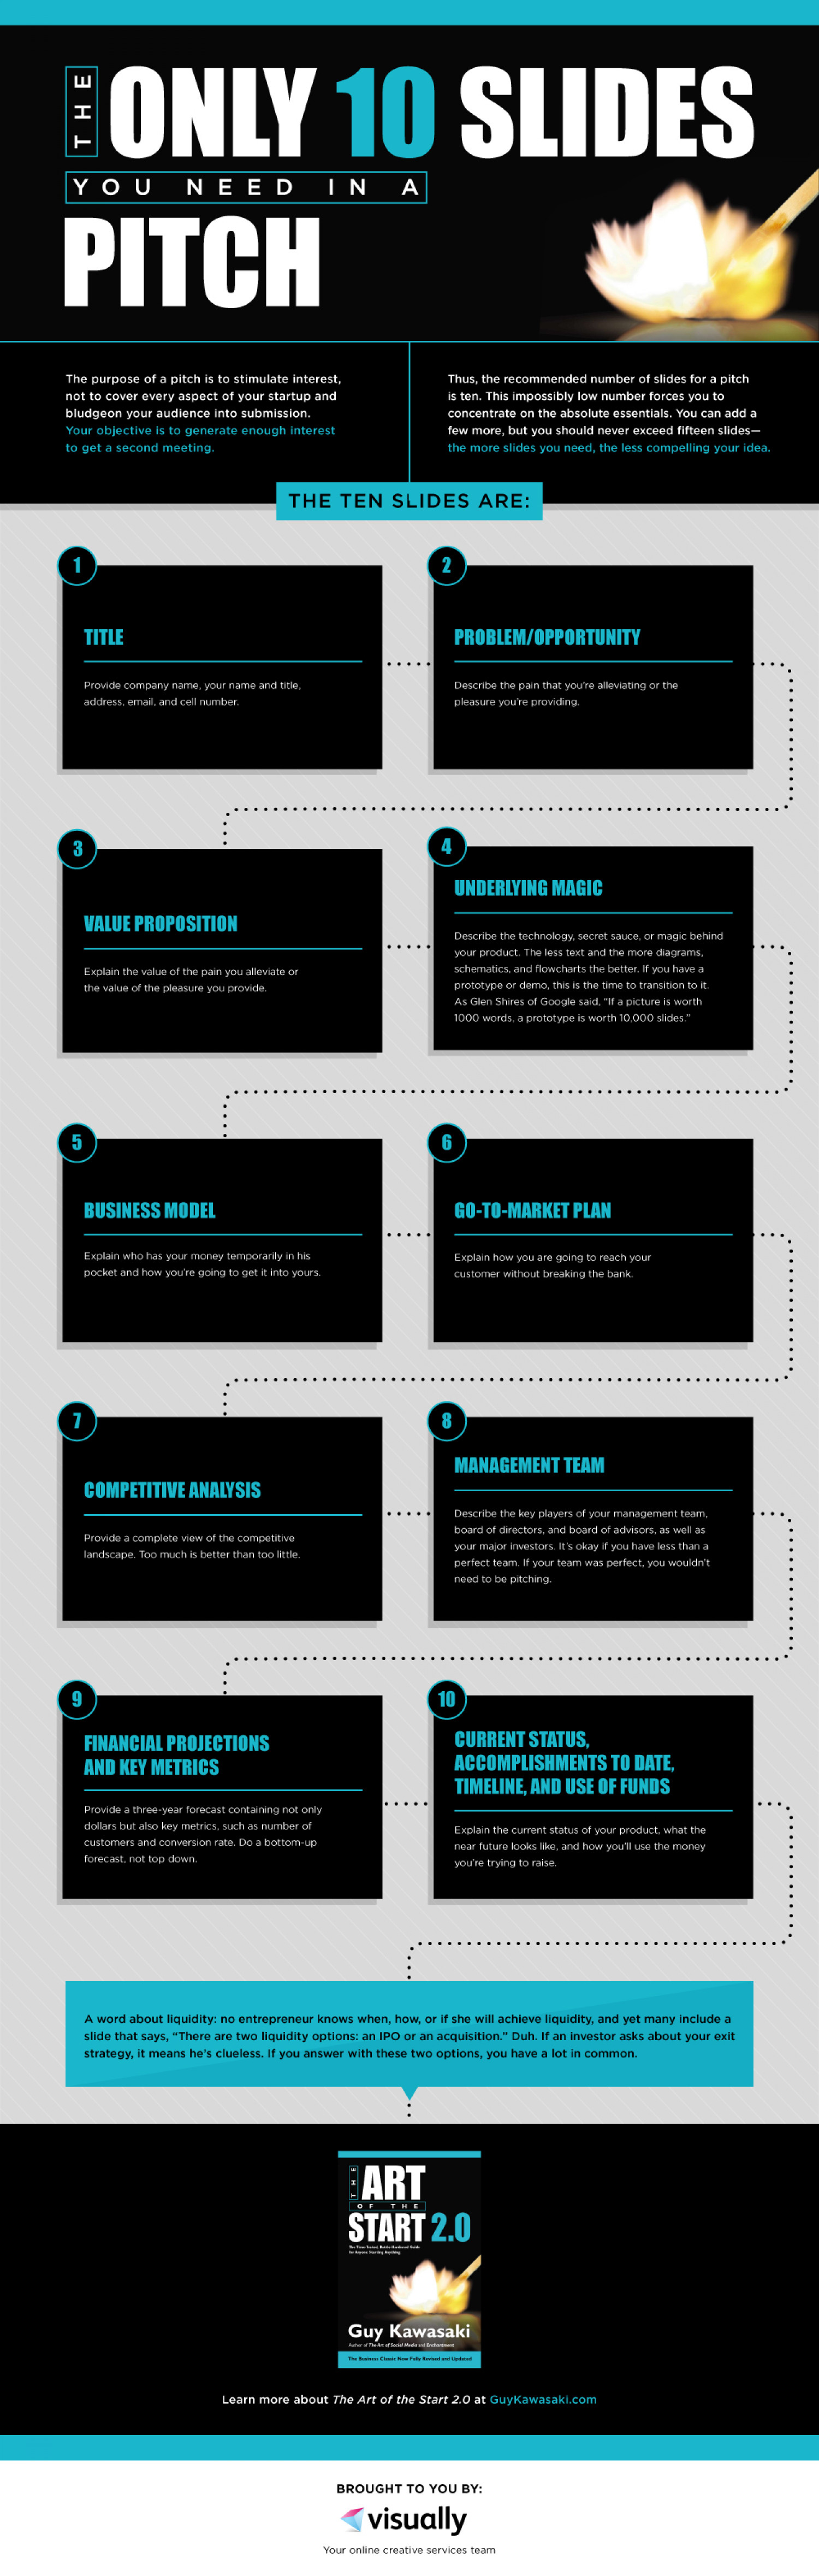 The Only 10 Slides You Need in a Pitch Infographic